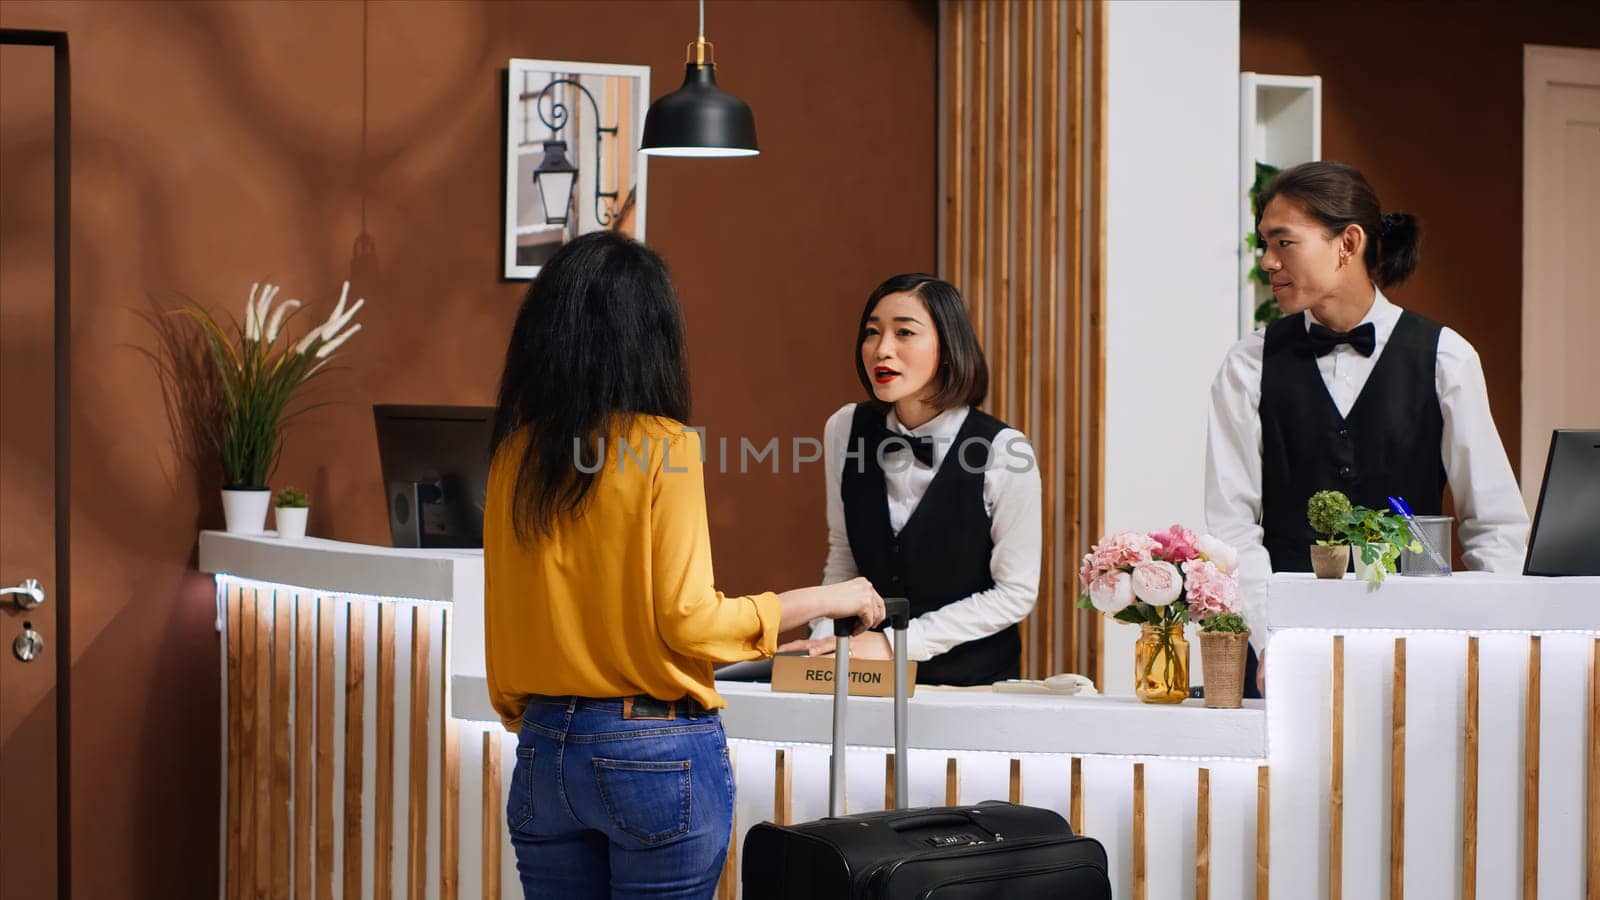 Asian hotel staff greeting customer at front desk entrance, welcoming female client and ensuring pleasant stay during vacation trip. Woman guest arriving in lobby with luggage, tourism concept.